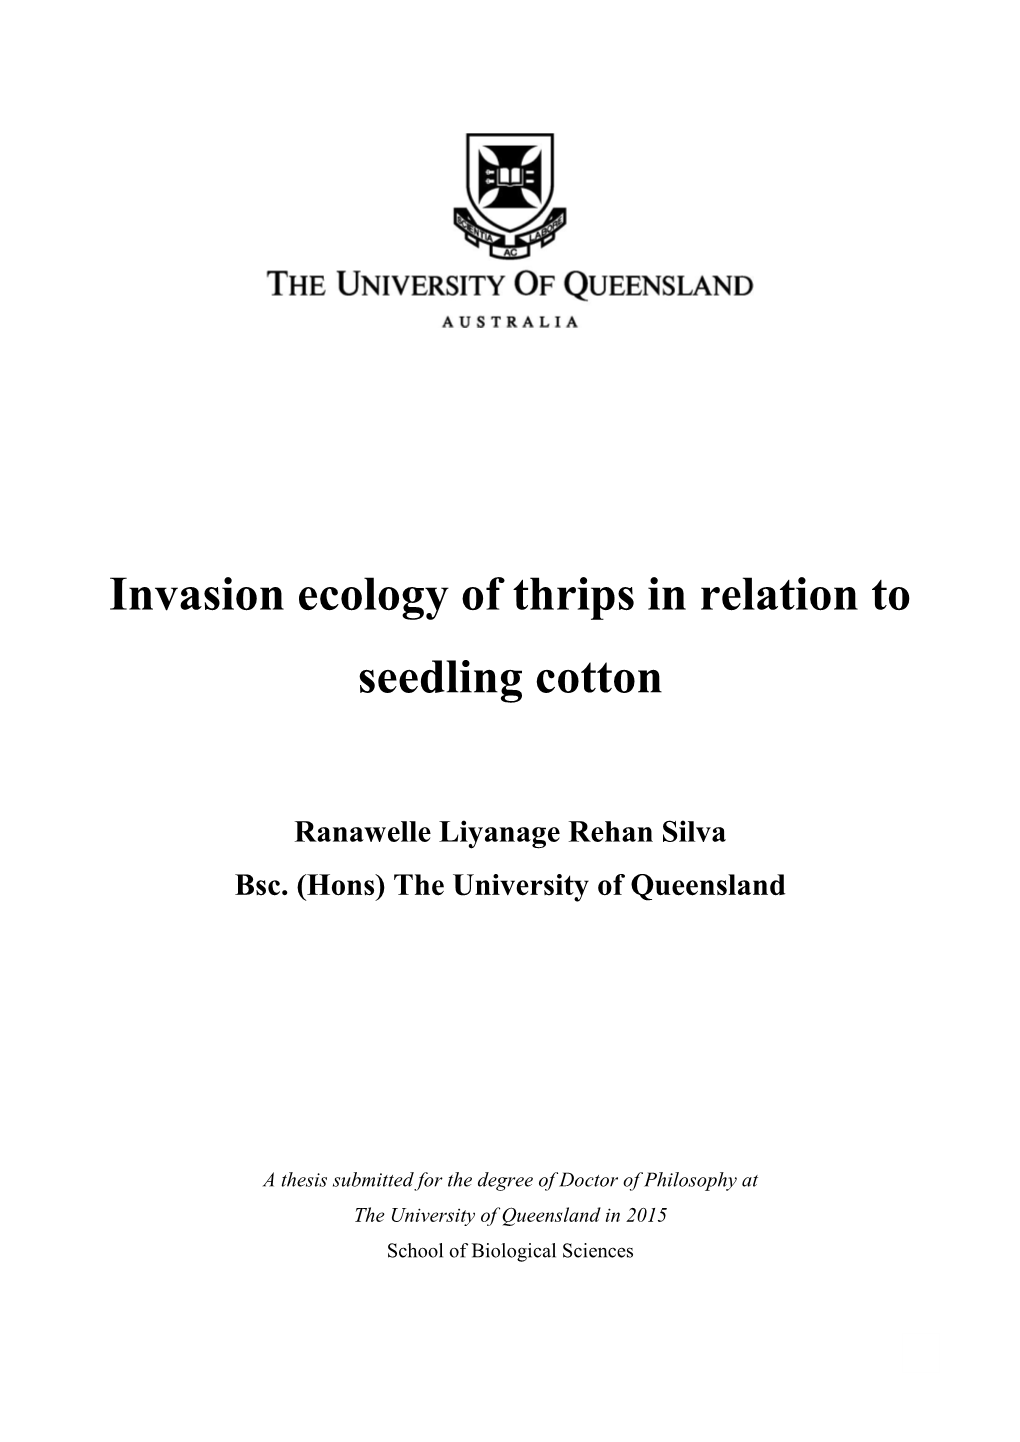 Invasion Ecology of Thrips in Relation to Seedling Cotton